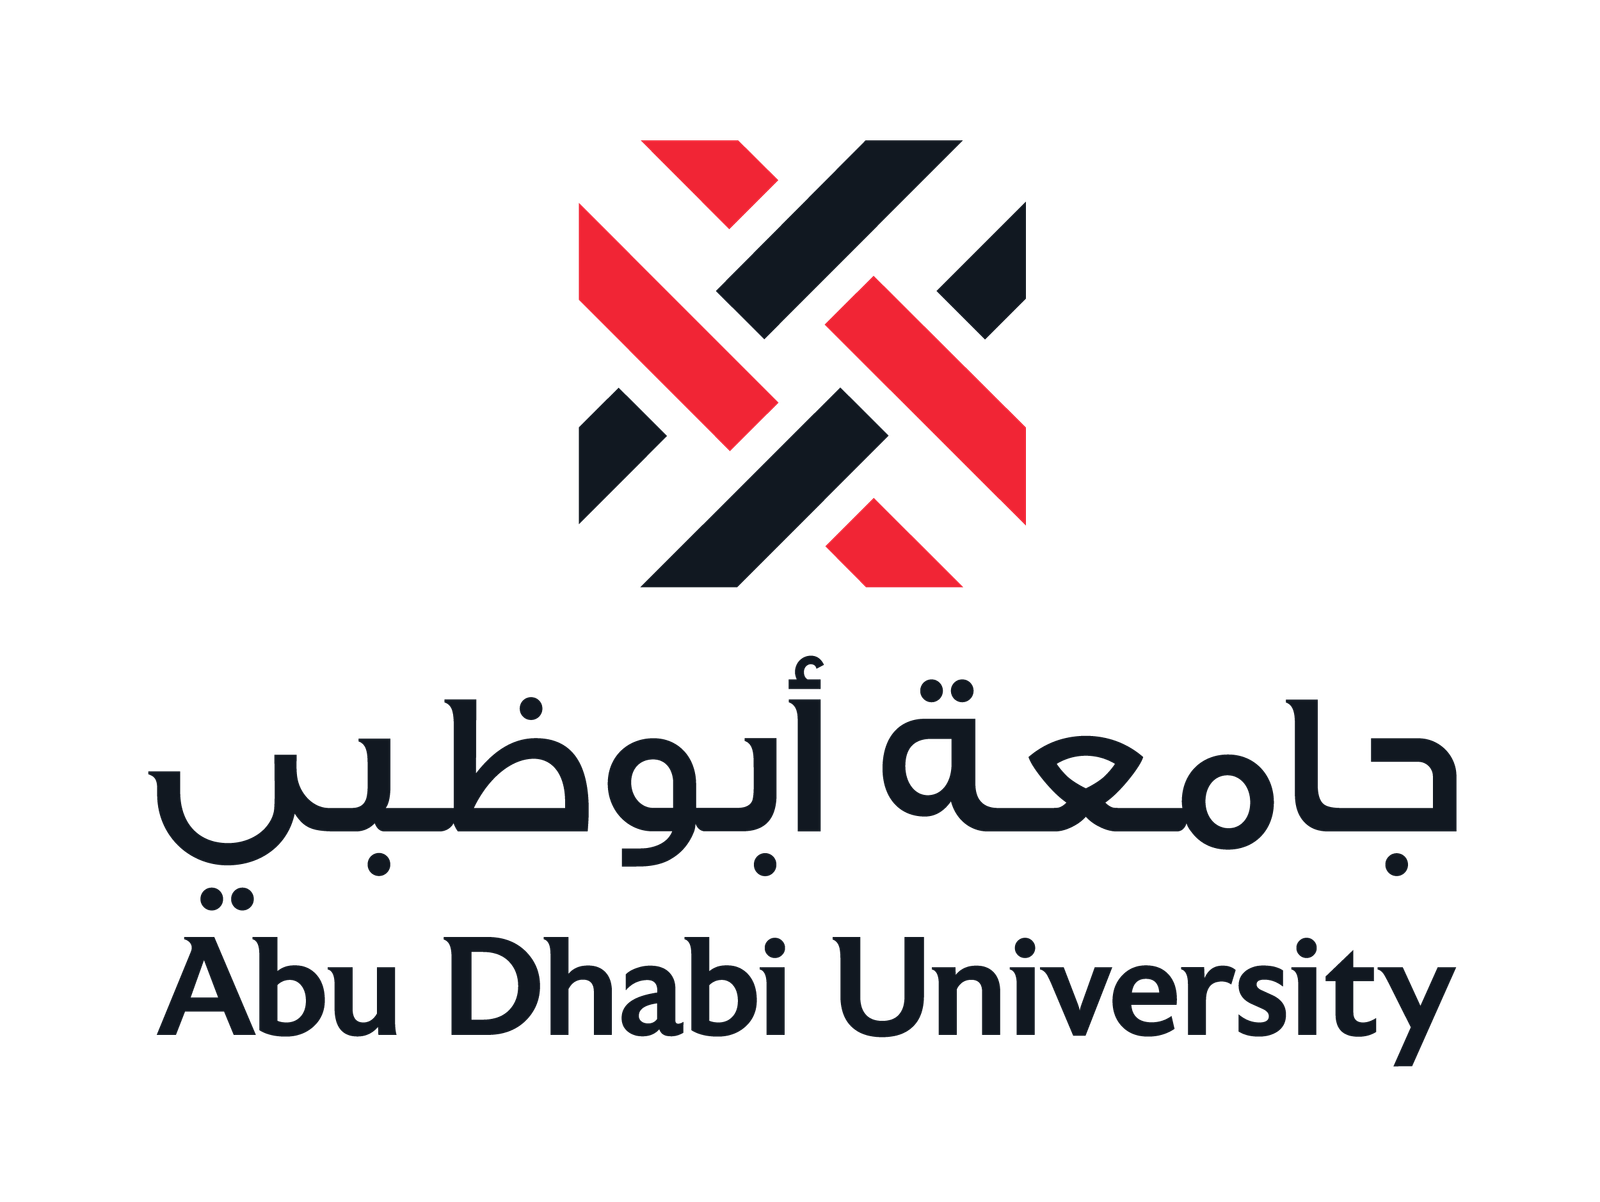 Find List of Courses offered Abu Dhabi University |Tution Fees Per year | Payment portal and Admission Entry Requirements